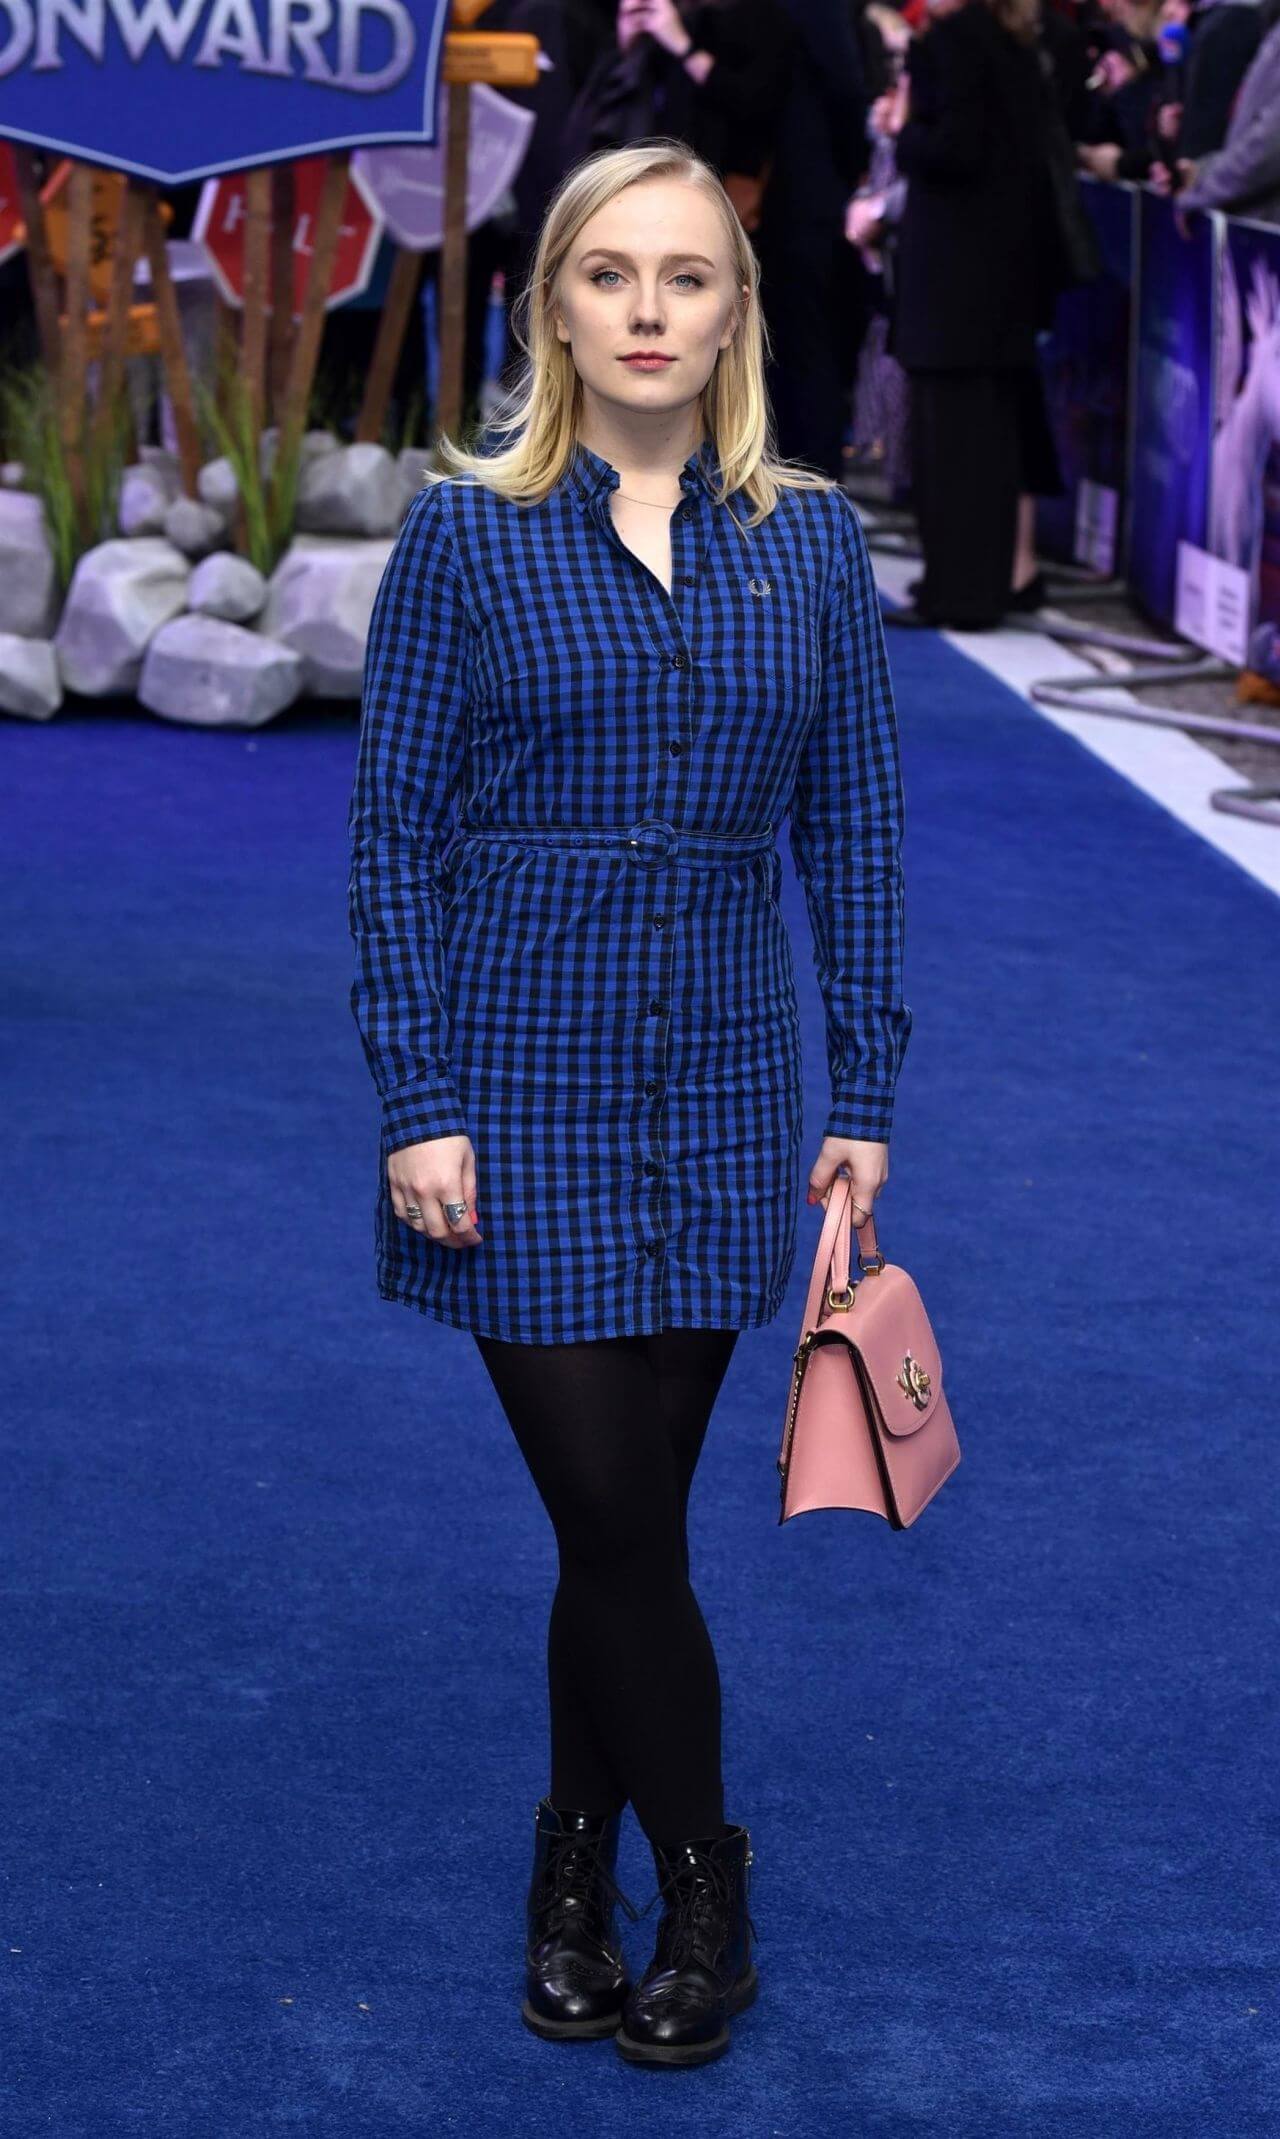 Alexa Davies – In Blue Checked Shirt Outfit - “Onward” Premiere in London